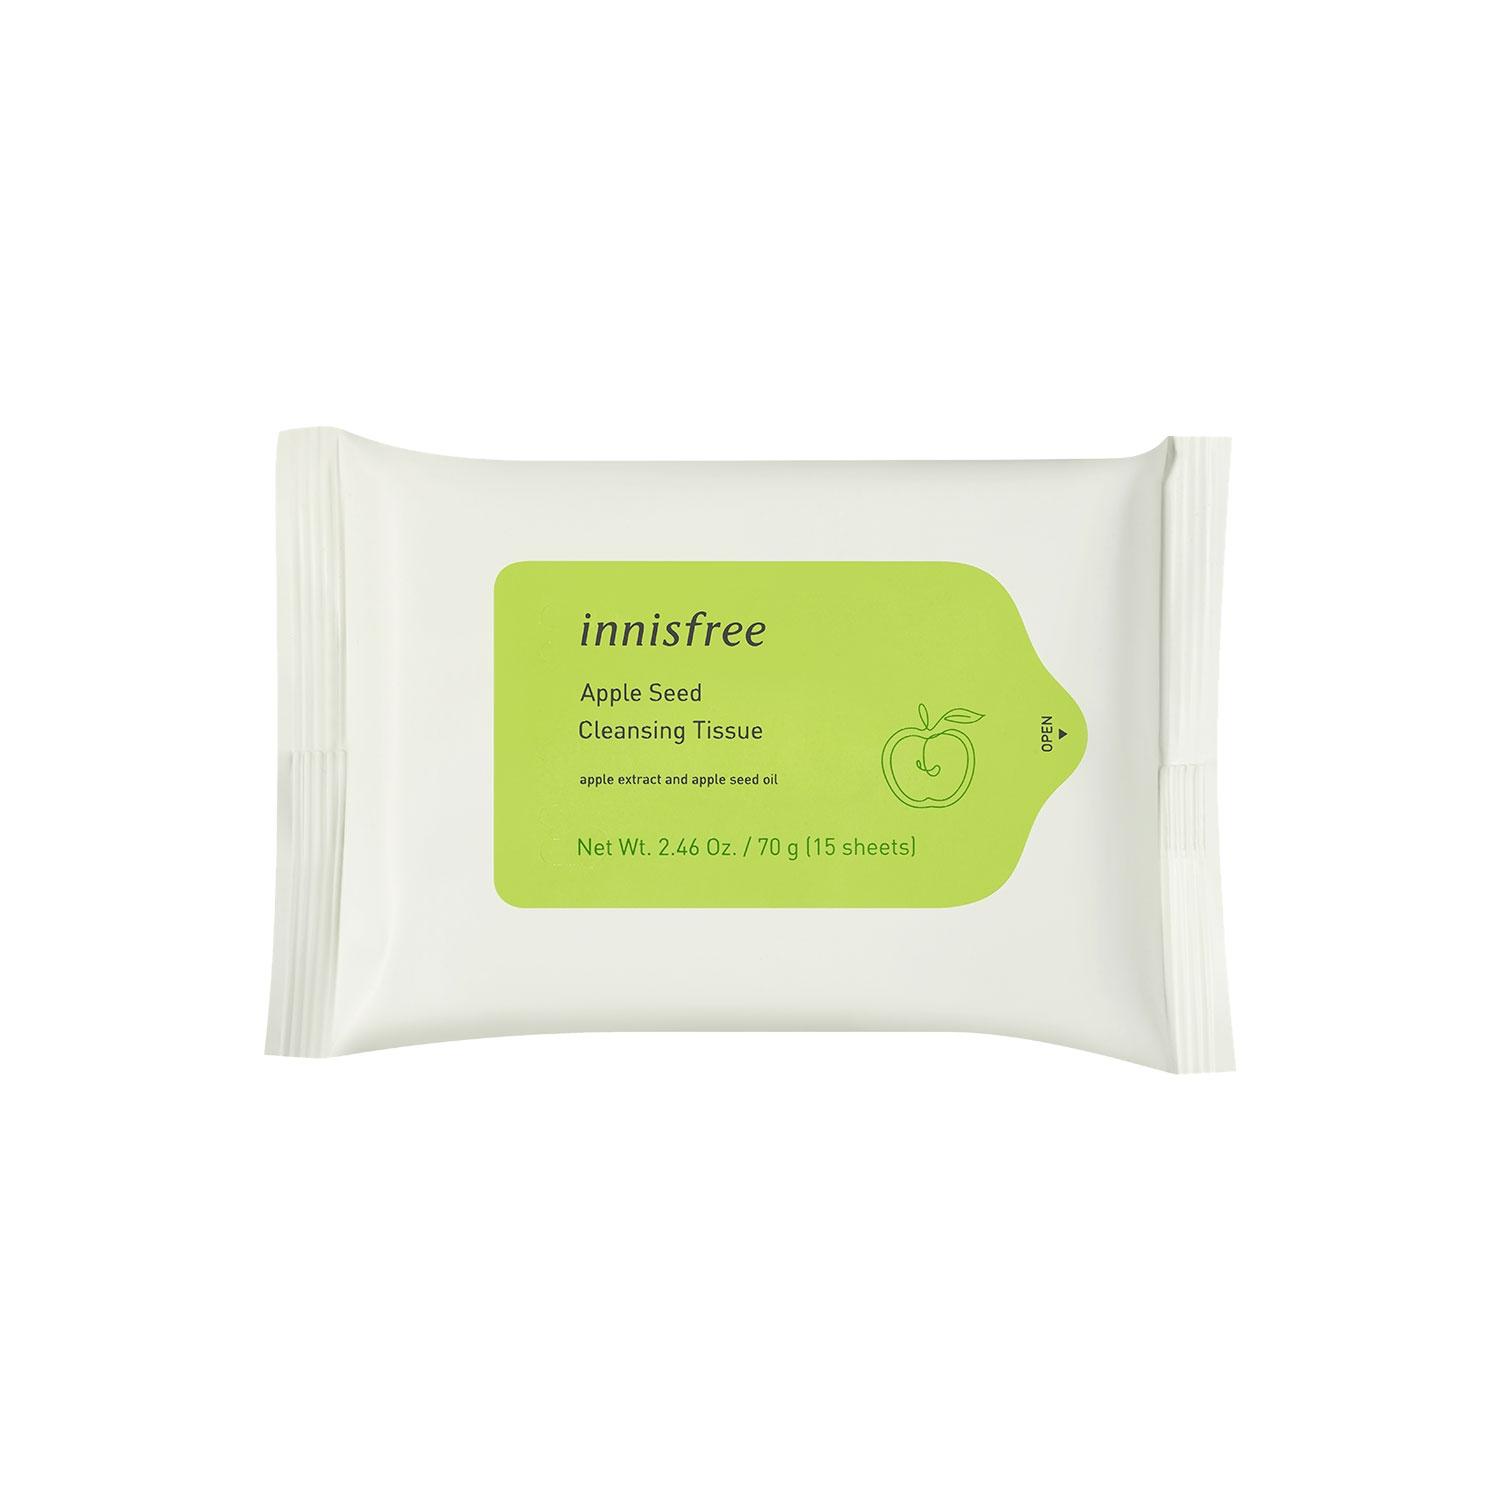 innisfree apple seed cleansing tissue (150g)